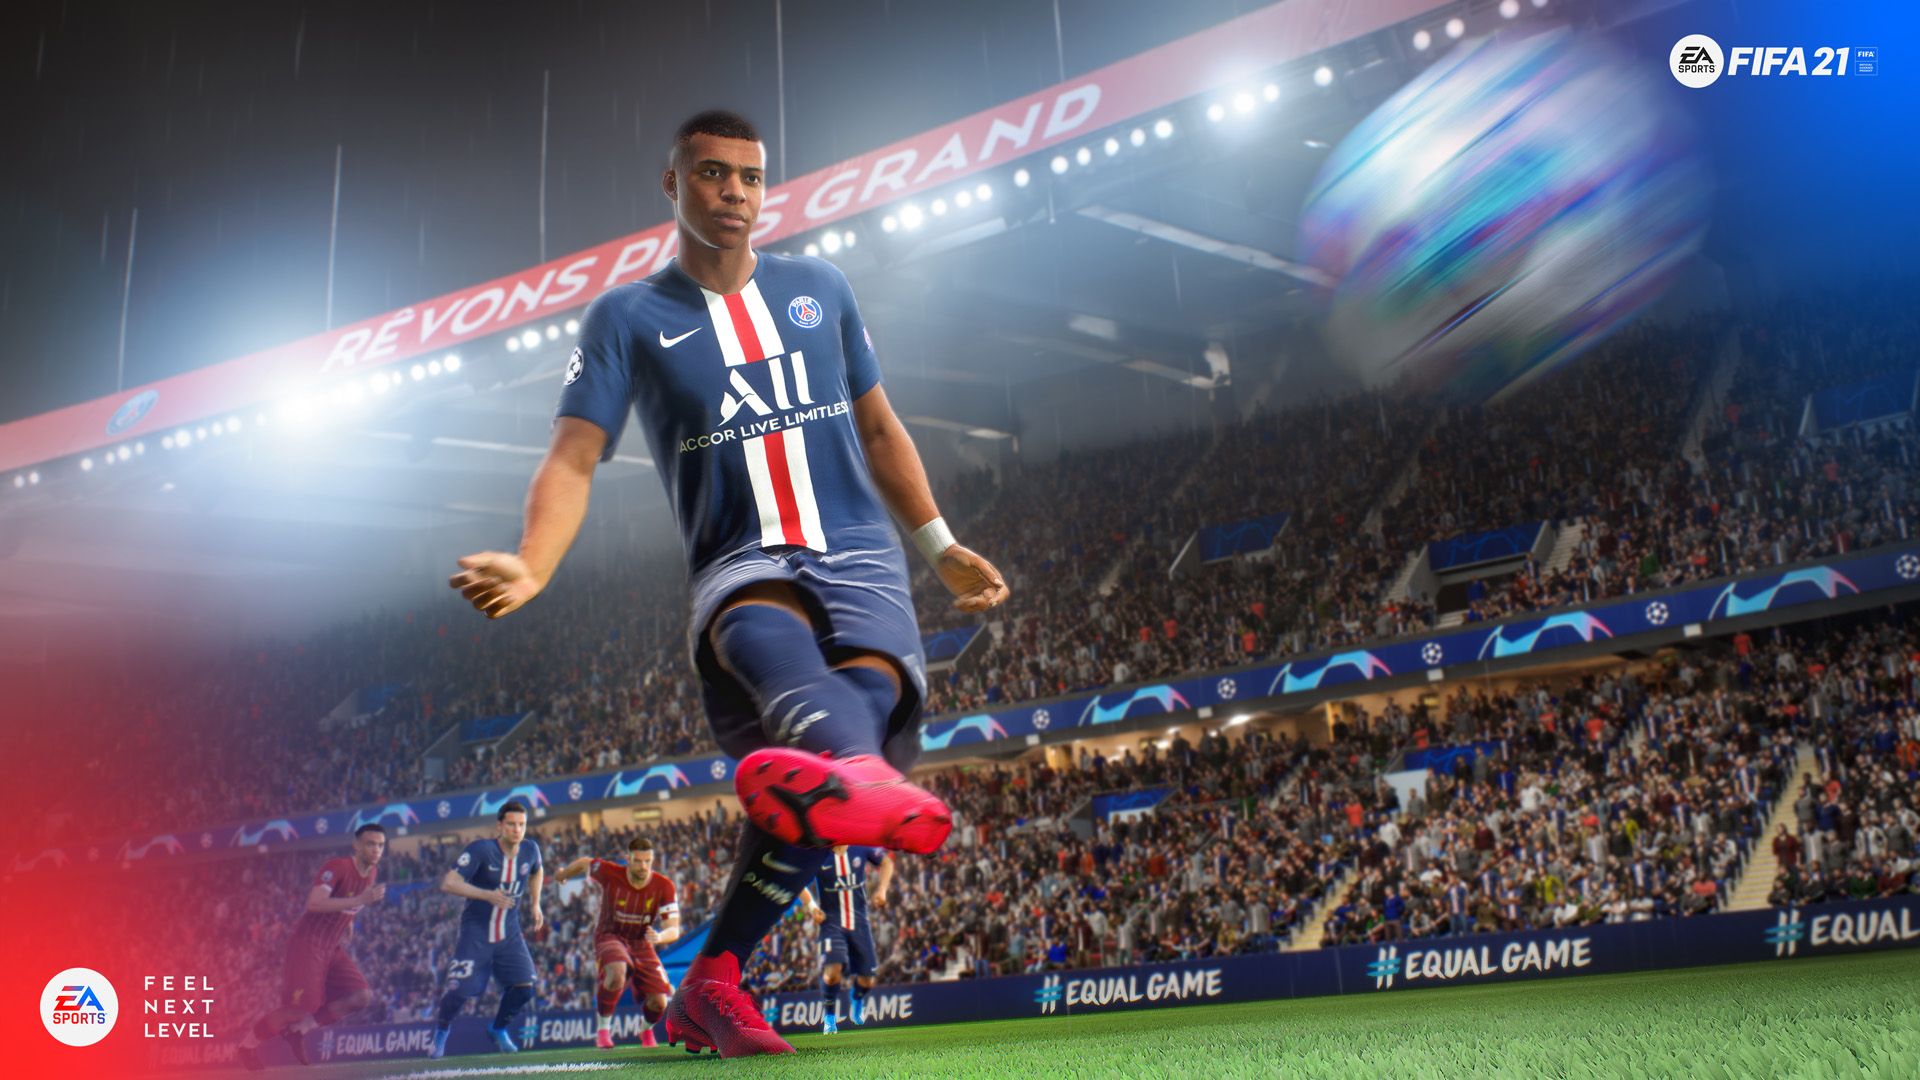 First full FIFA 21 trailer drops, giving us a look at next-gen gameplay photo 1